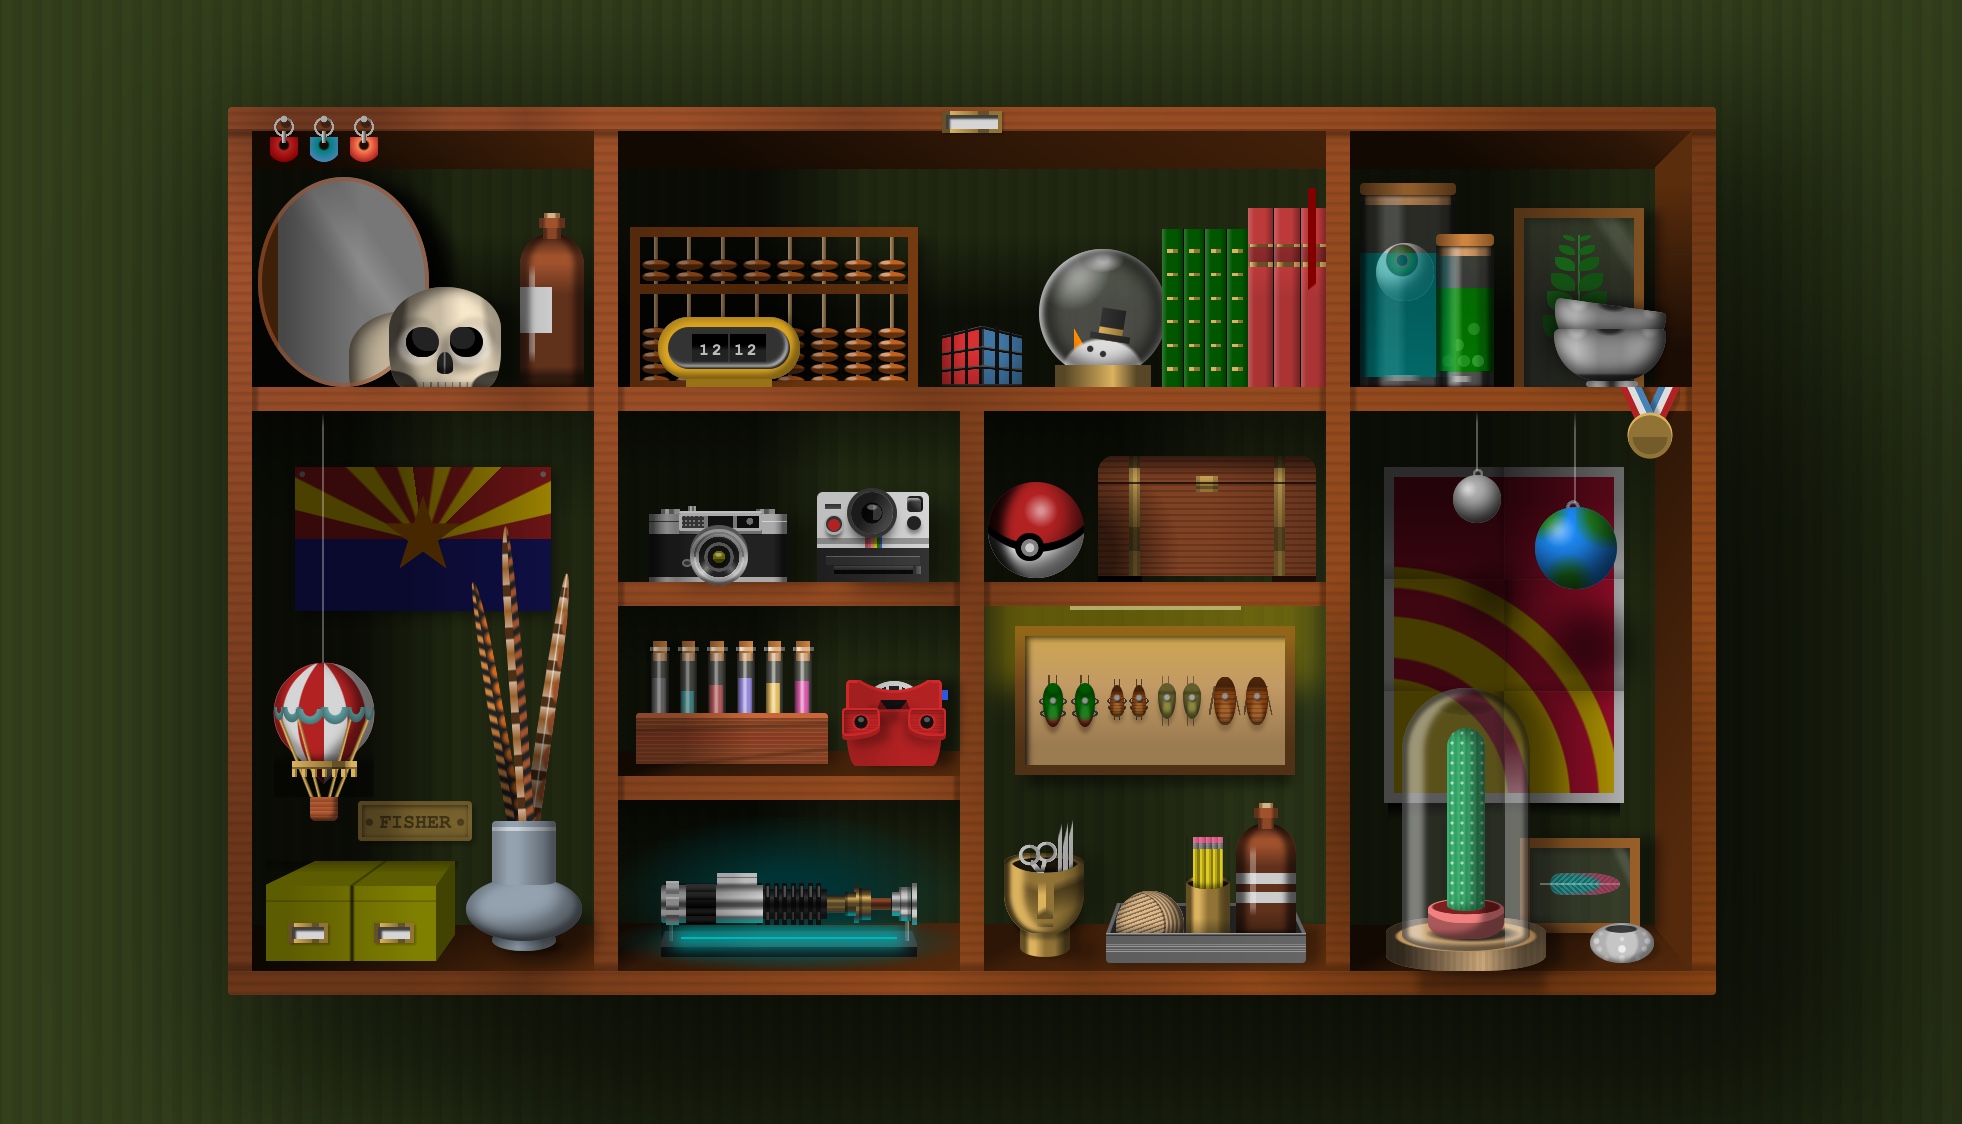 A whole CSS-art cabinet of single-div objects drawn by Lynn Fisher,
from a mirror and skull, to abacus, clock, viewfinder, plants,
snow globe, hot air balloon, and lightsaber.
